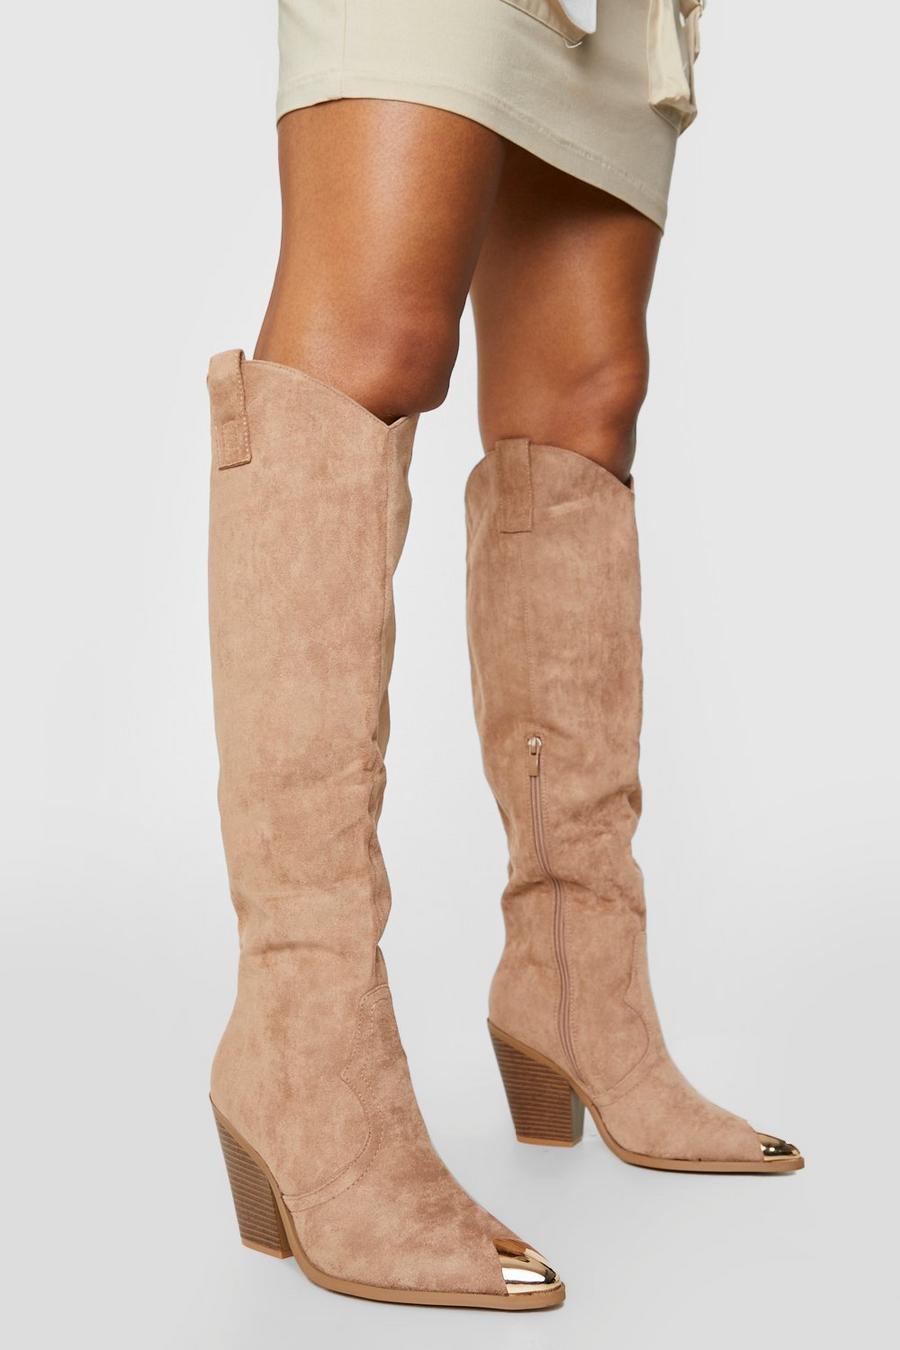 Sand Knee High Toe Cap Pull On Western Cowboy Boots